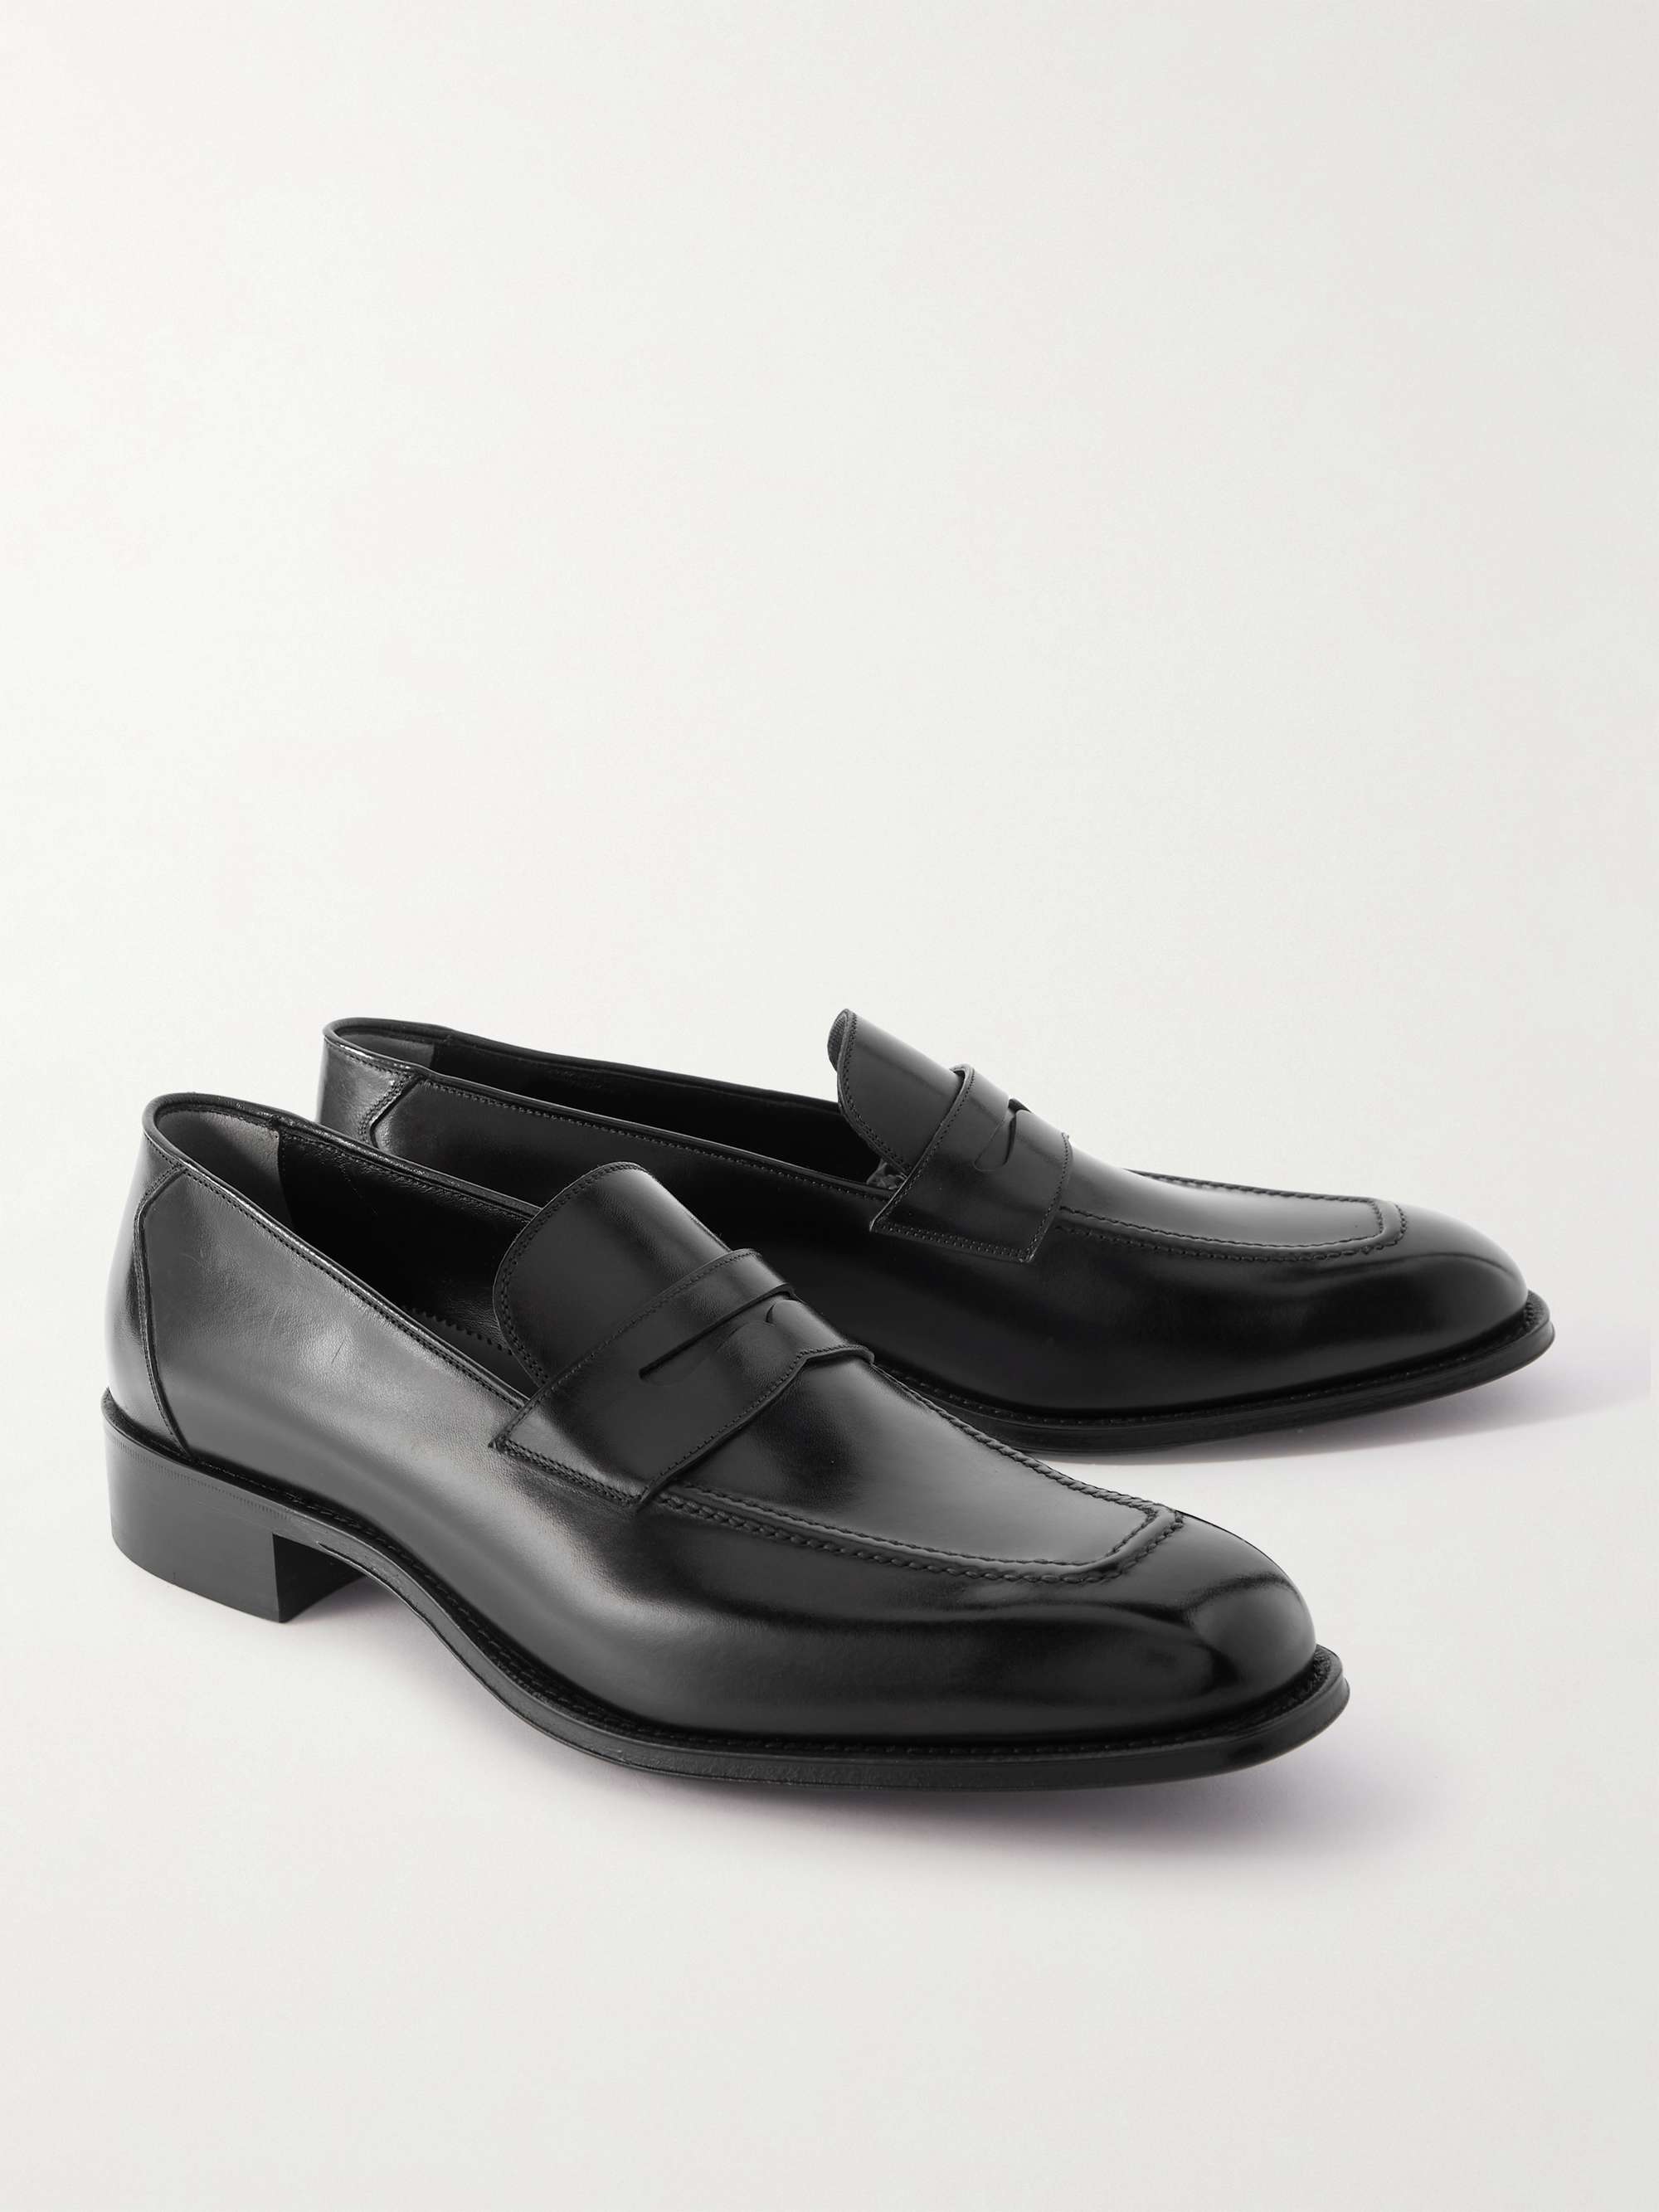 TOM FORD Claydon Leather Penny Loafers